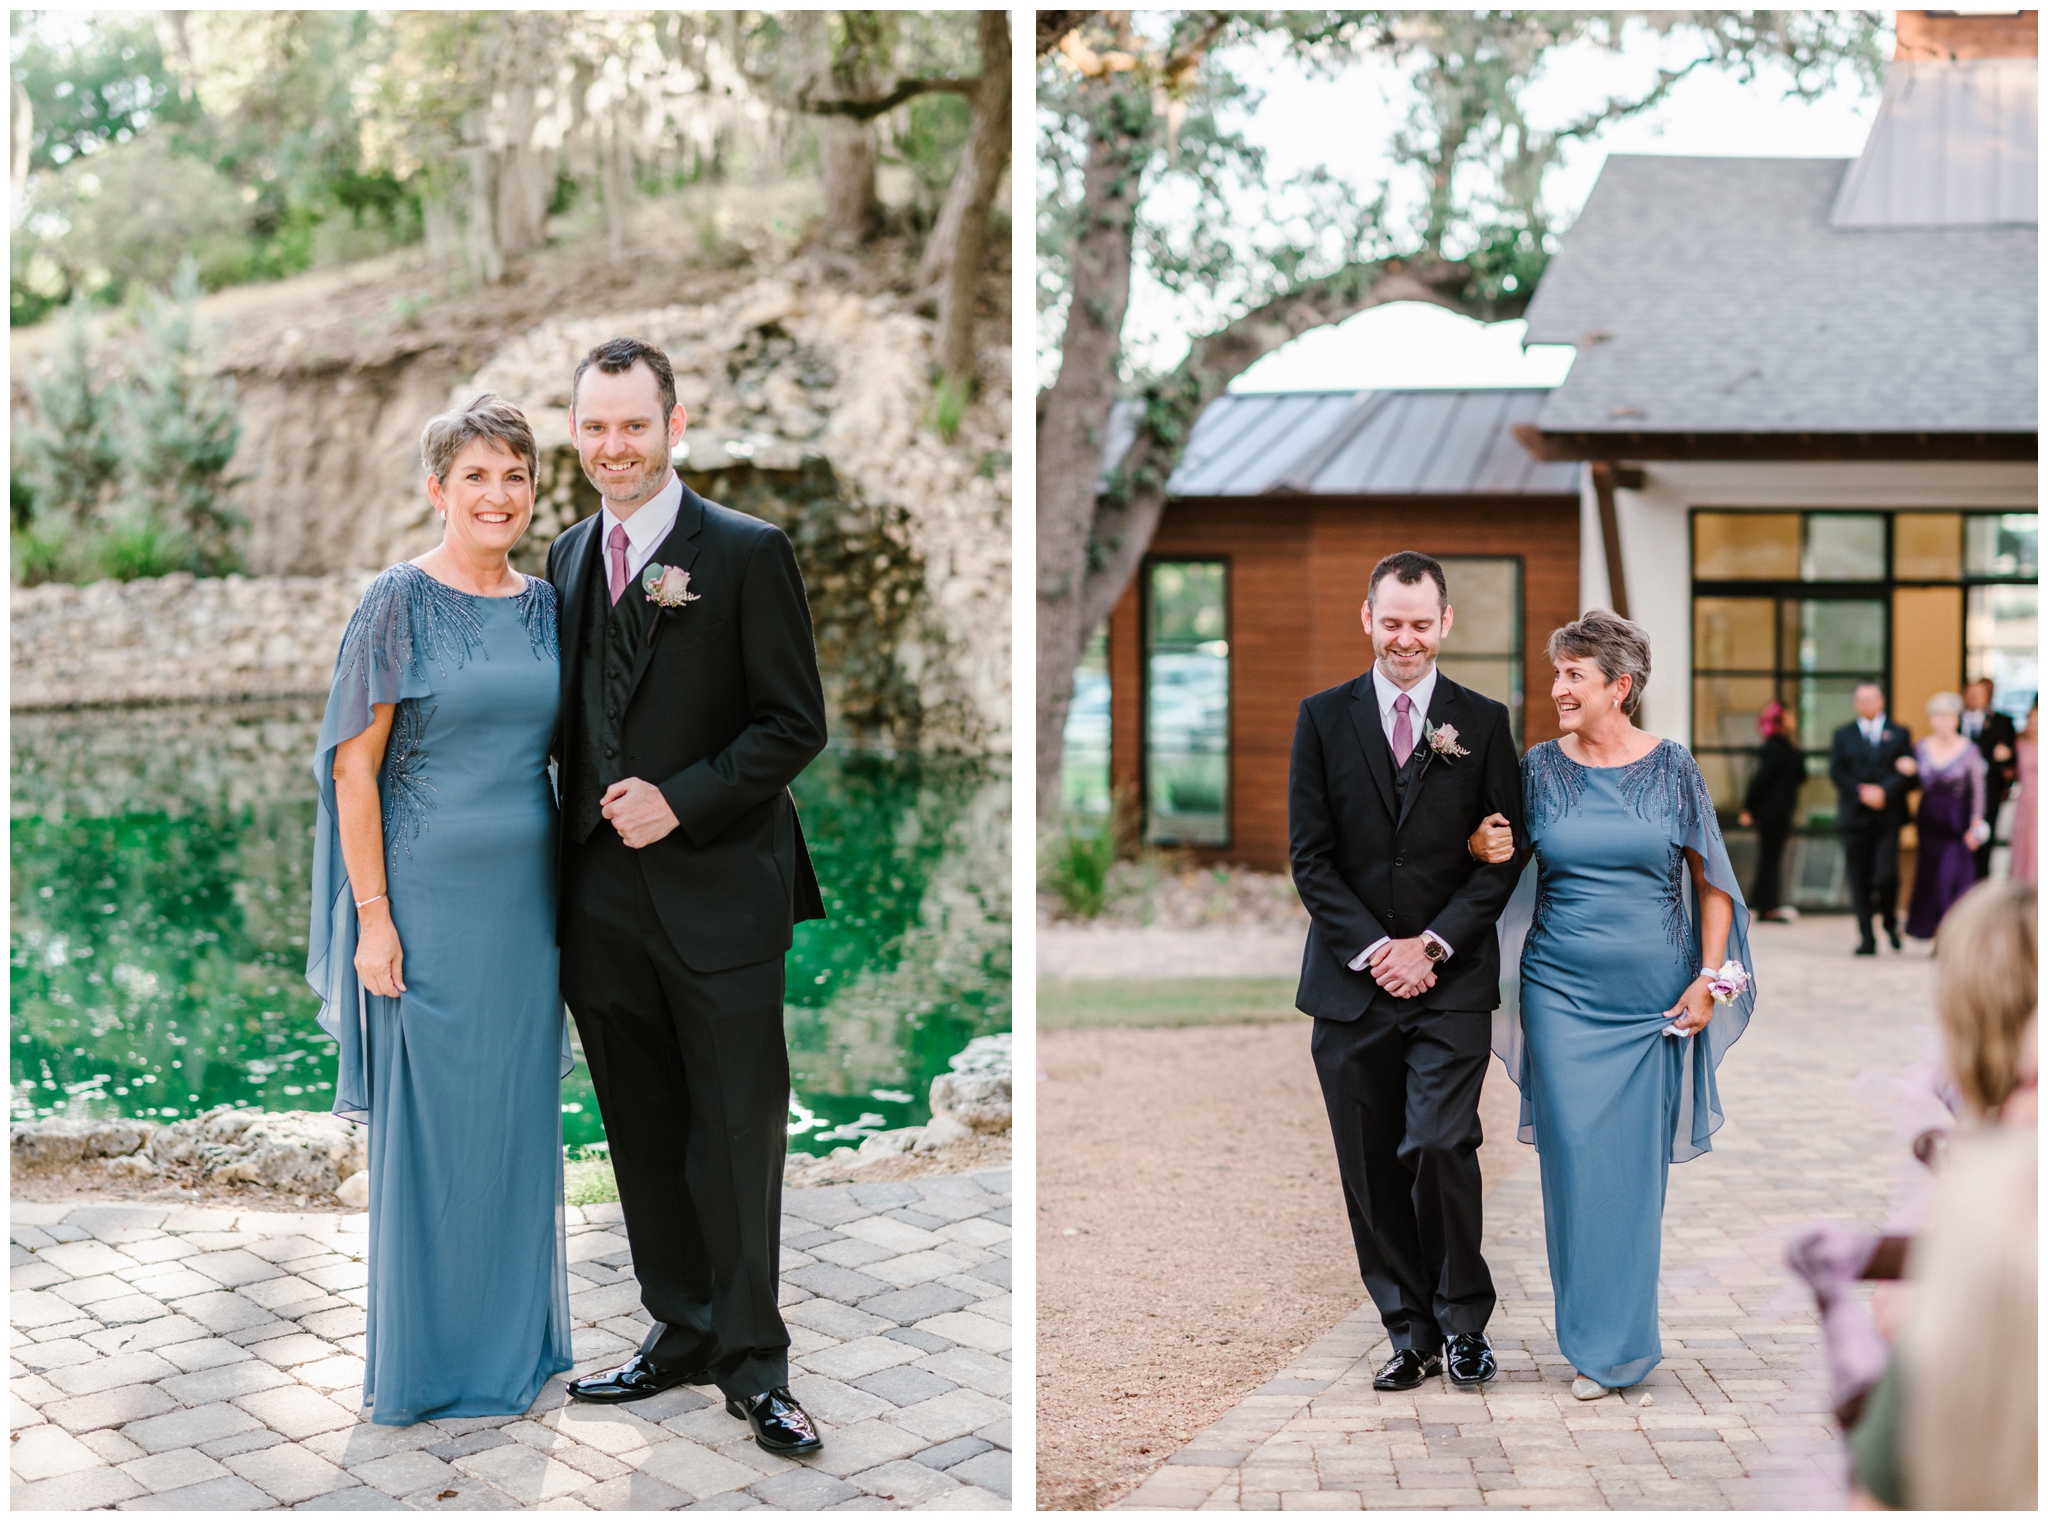 Wedding ceremony at Hayes Hollow at Hidden Falls outside of Austin, Texas | Joslyn Holtfort Photography